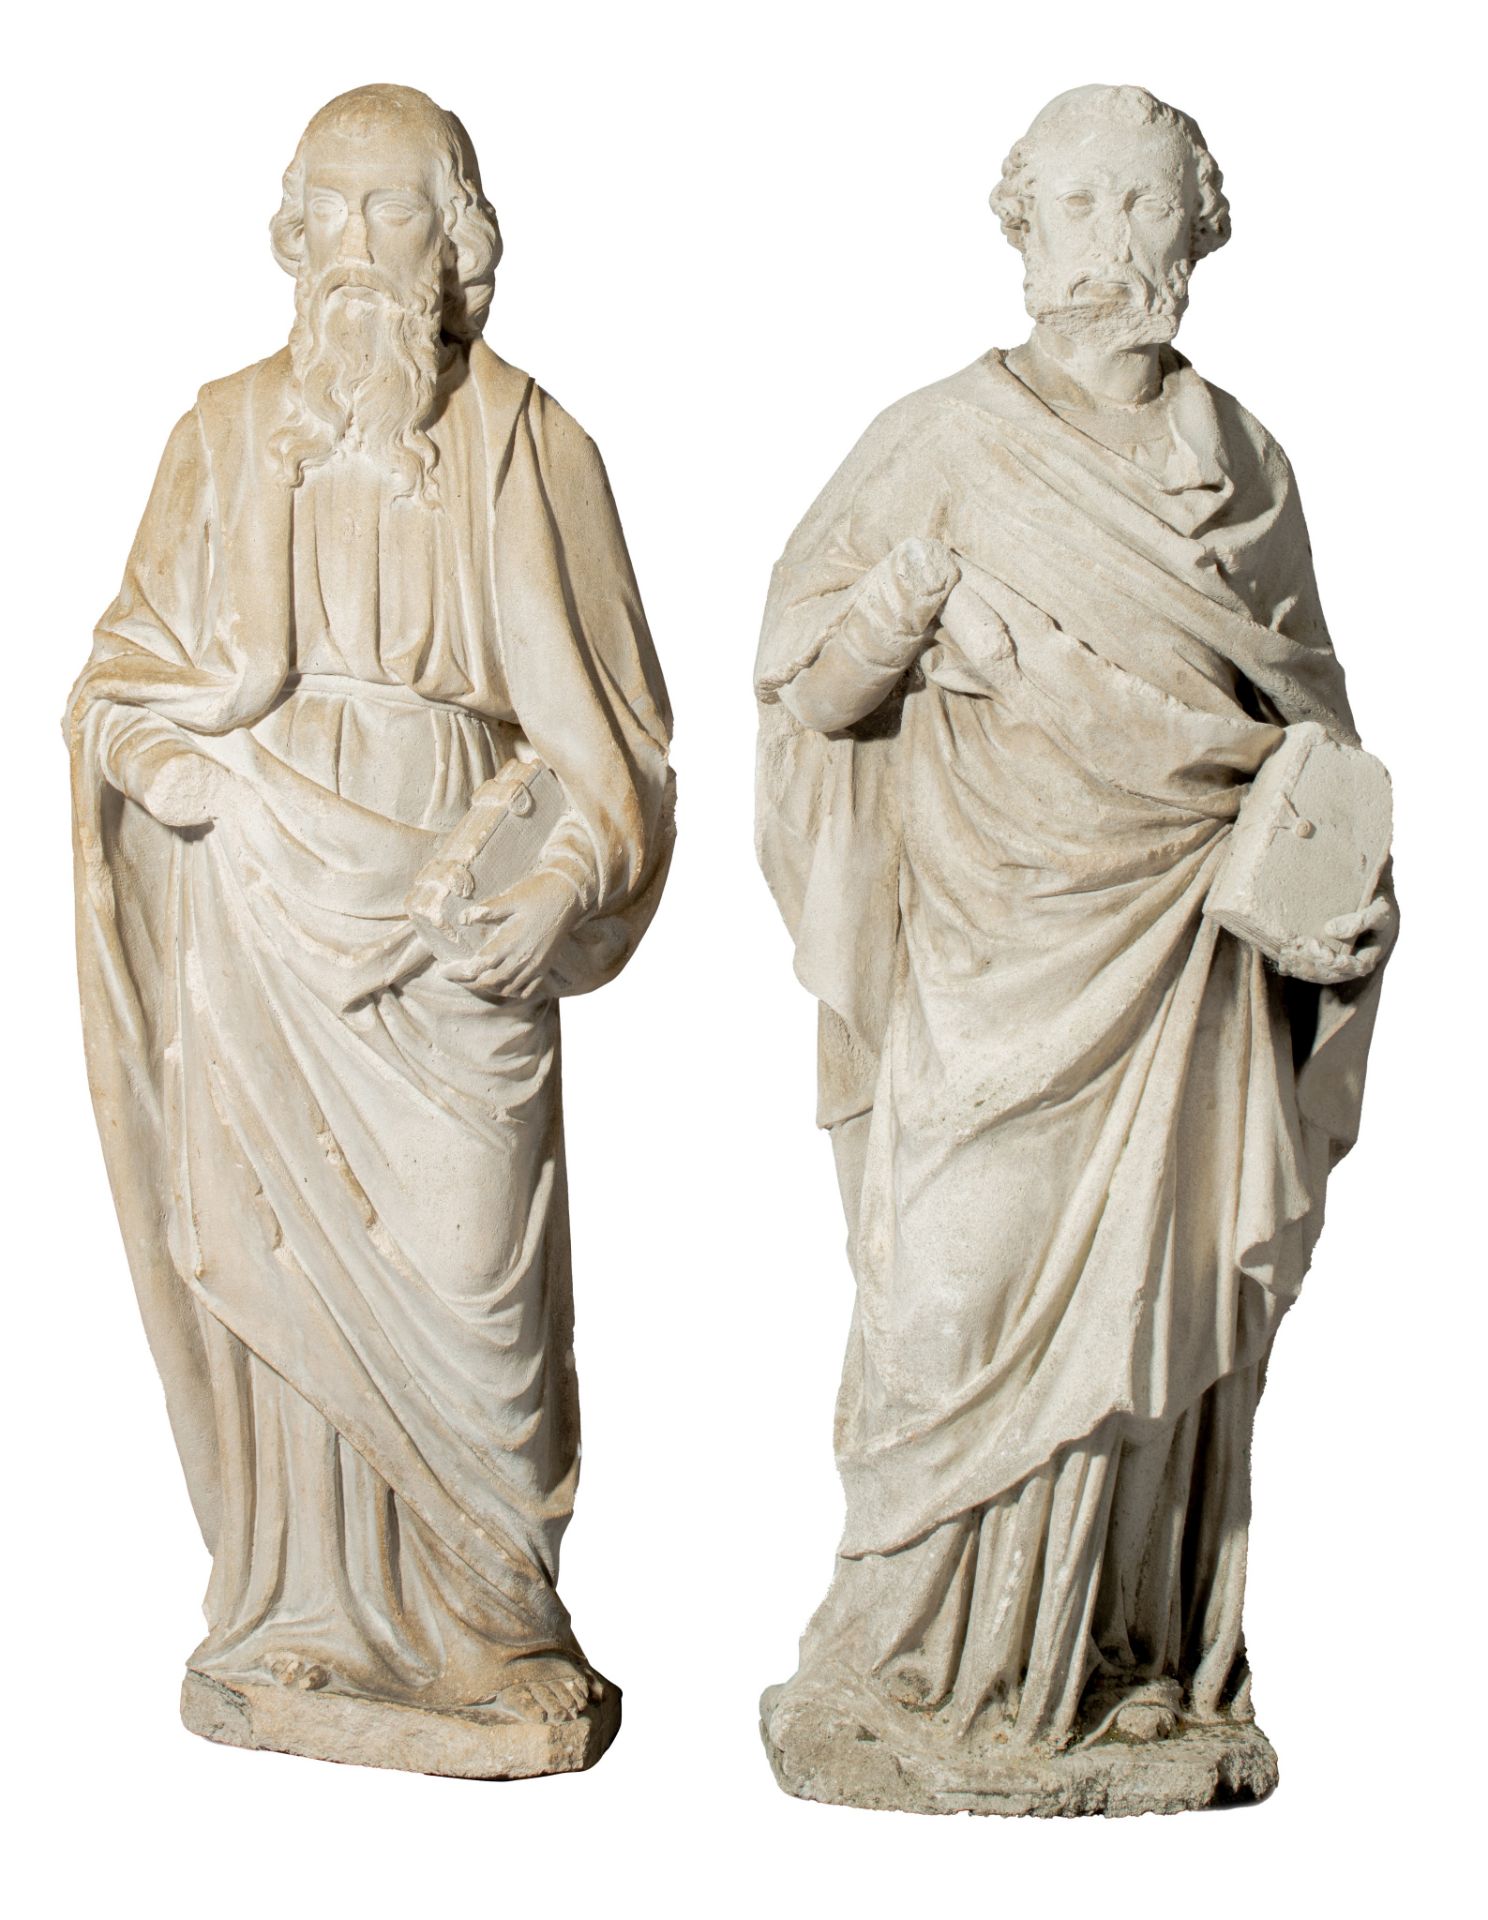 Two matching reconstituted stone sculptures of standing evangelists, H 83 - 85 cm